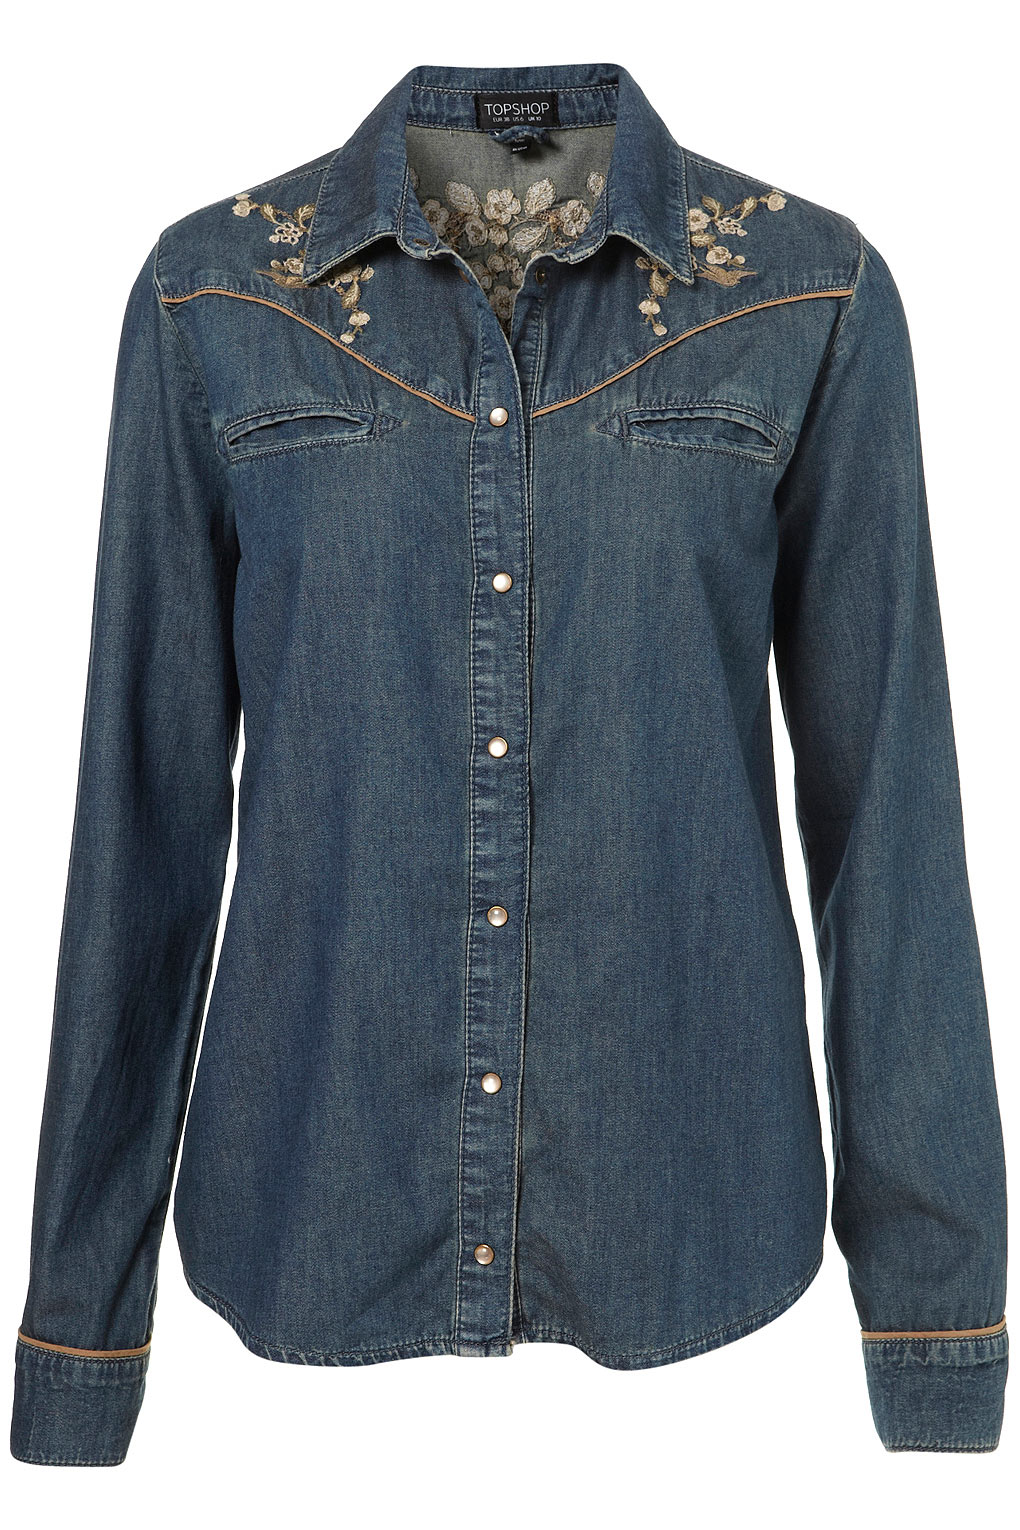 TOPSHOP Moto Floral Embroidered Denim Shirt in Mid Stone (Blue) - Lyst